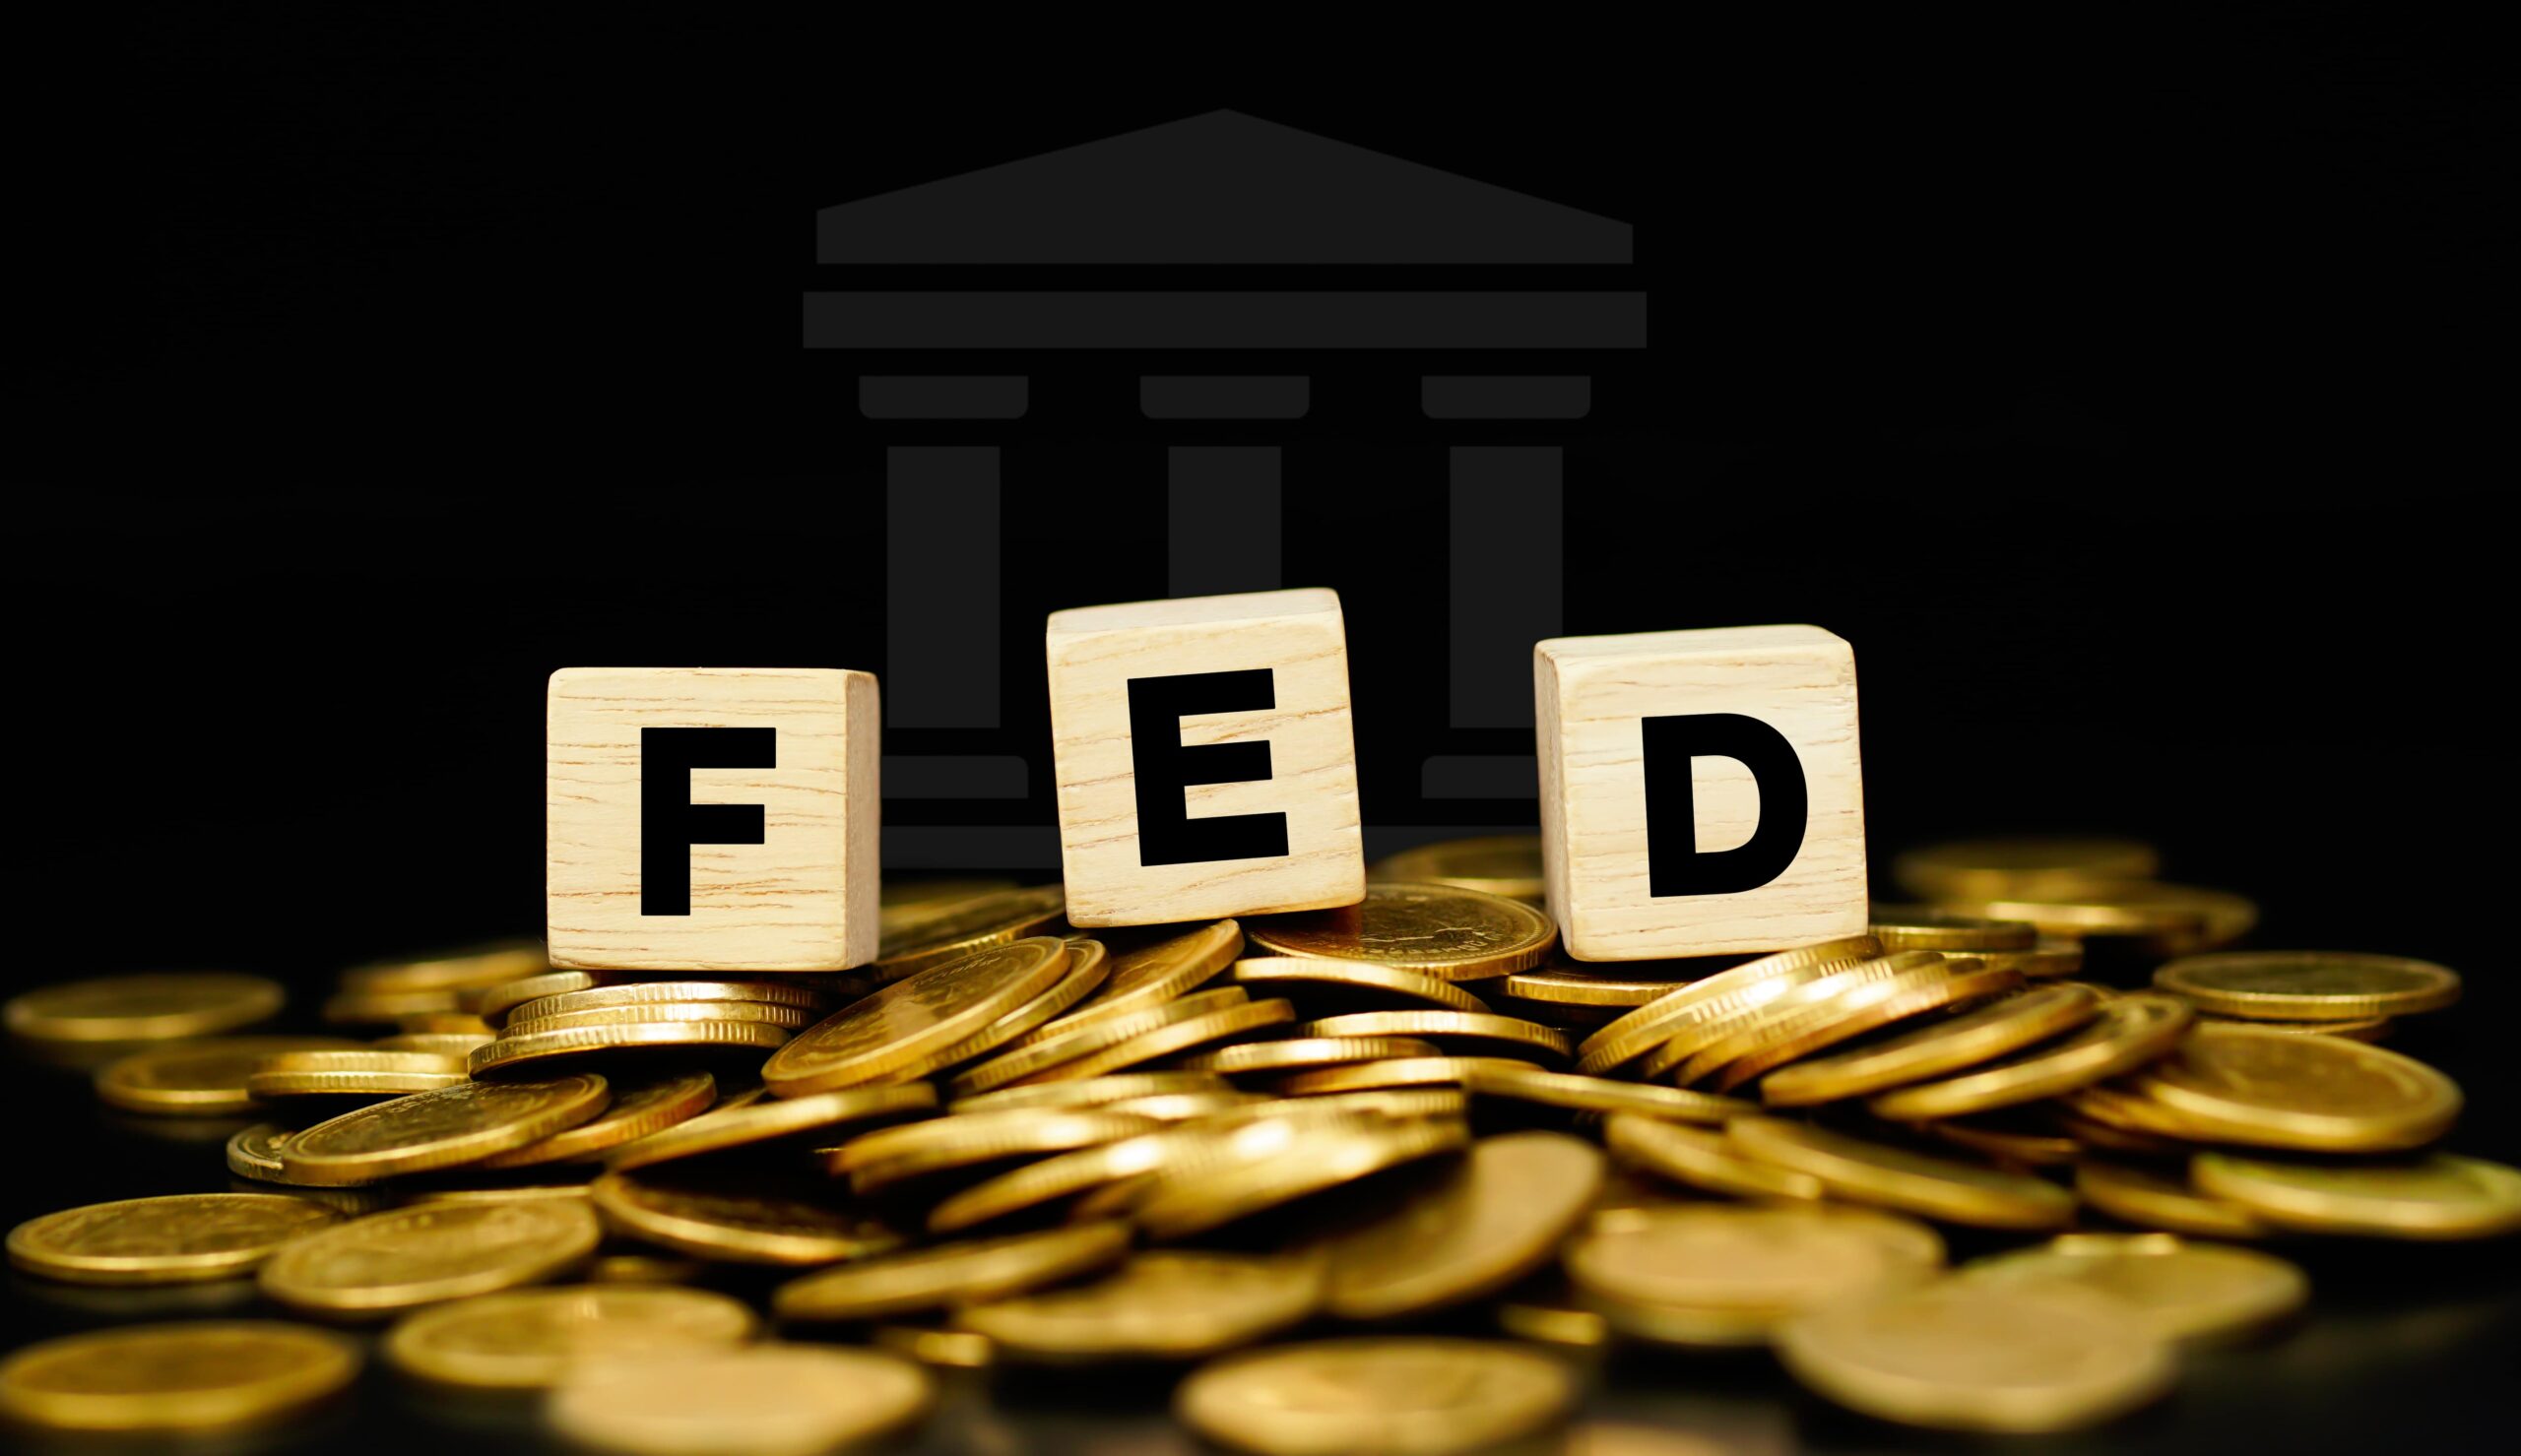 stacks of gold coins with the letters fed on a wooden cube business concept scaled